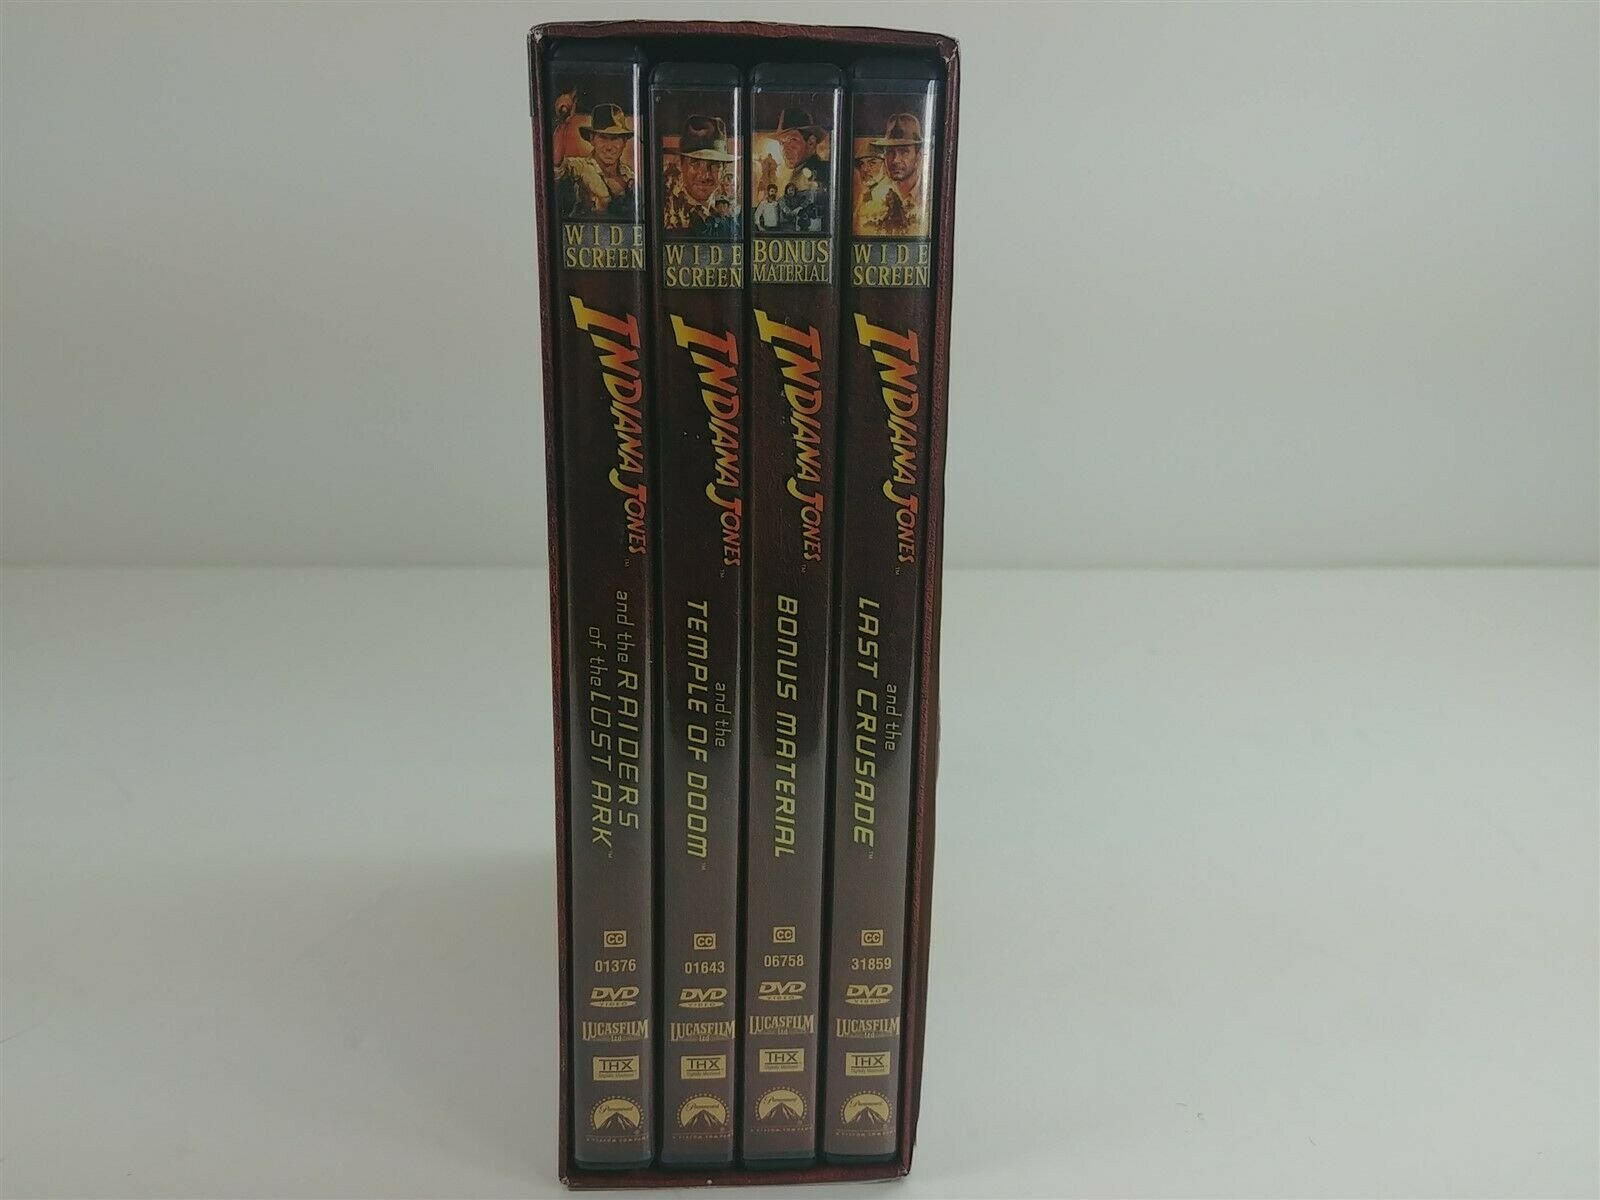 Indiana Jones The Complete Collection 4 DVD Widescreen Set